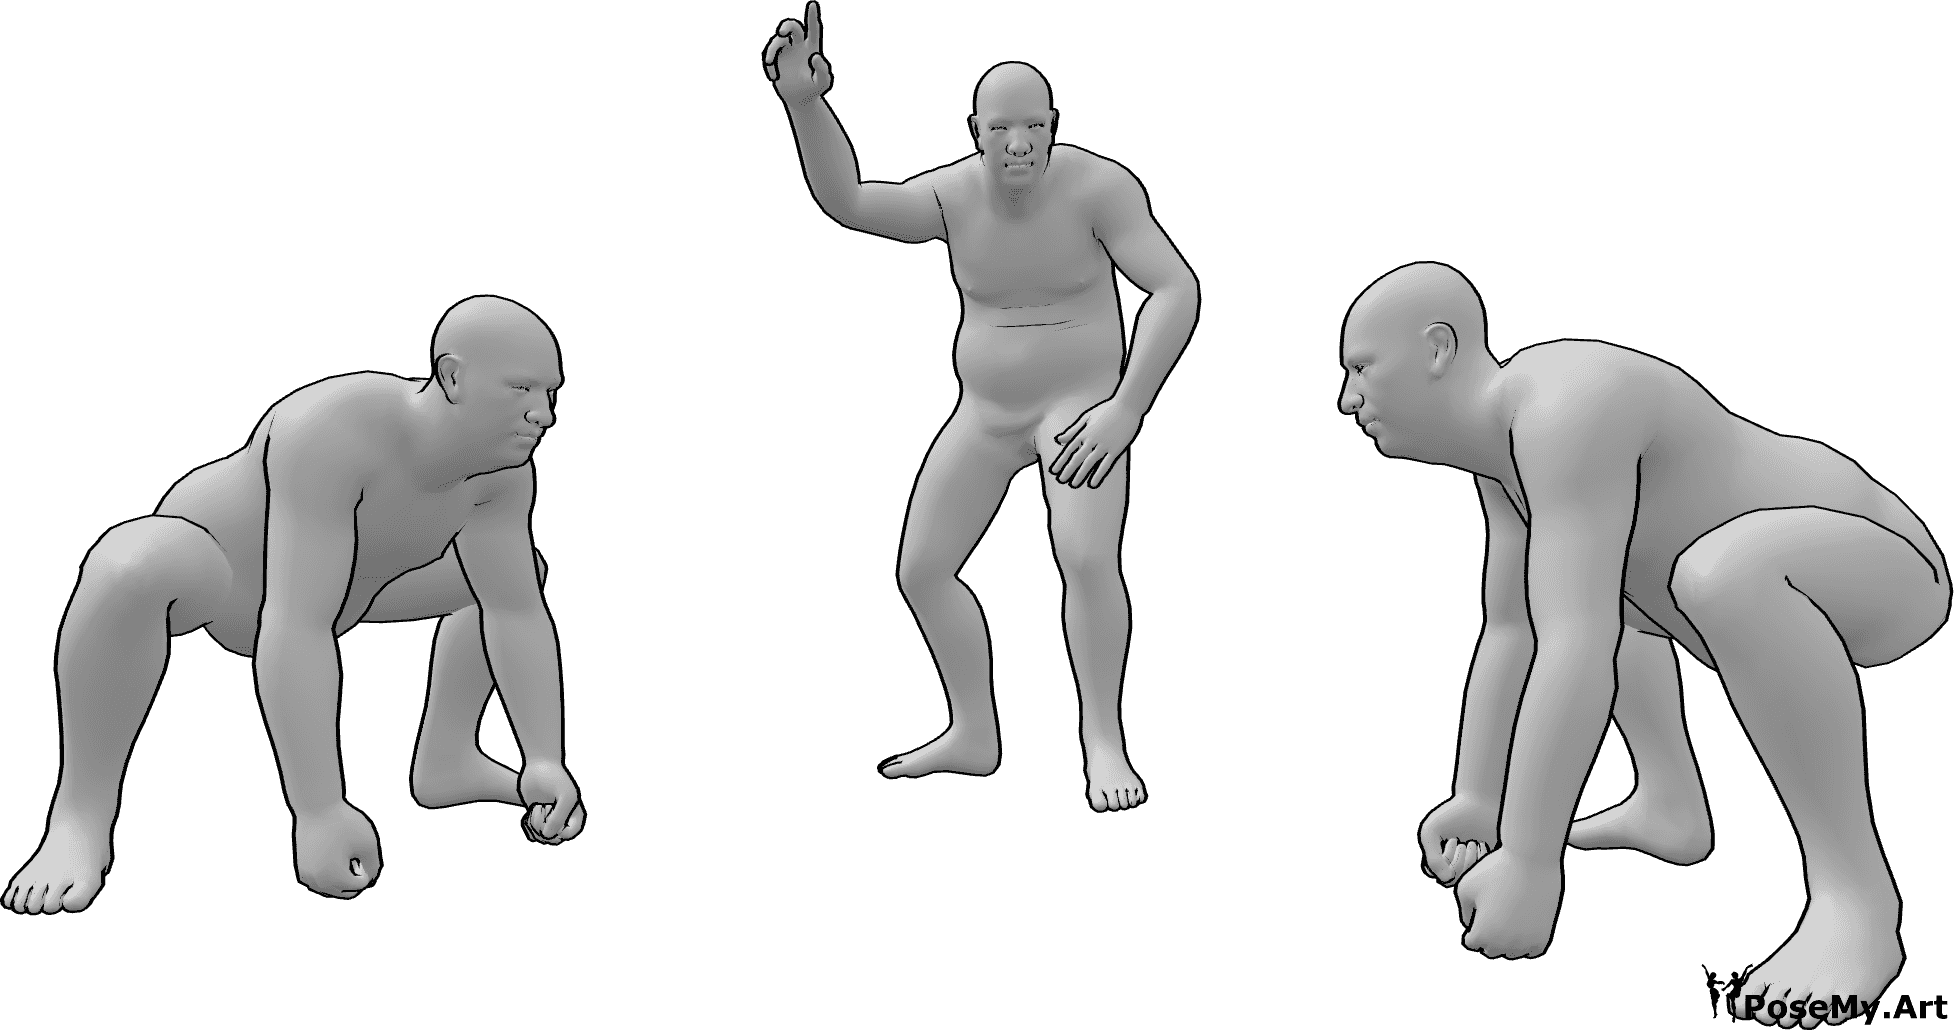 Pose Reference - Sumo crouching fists pose - Wrestlers are crouching with fists on the floor, before the referee signals to start wrestling